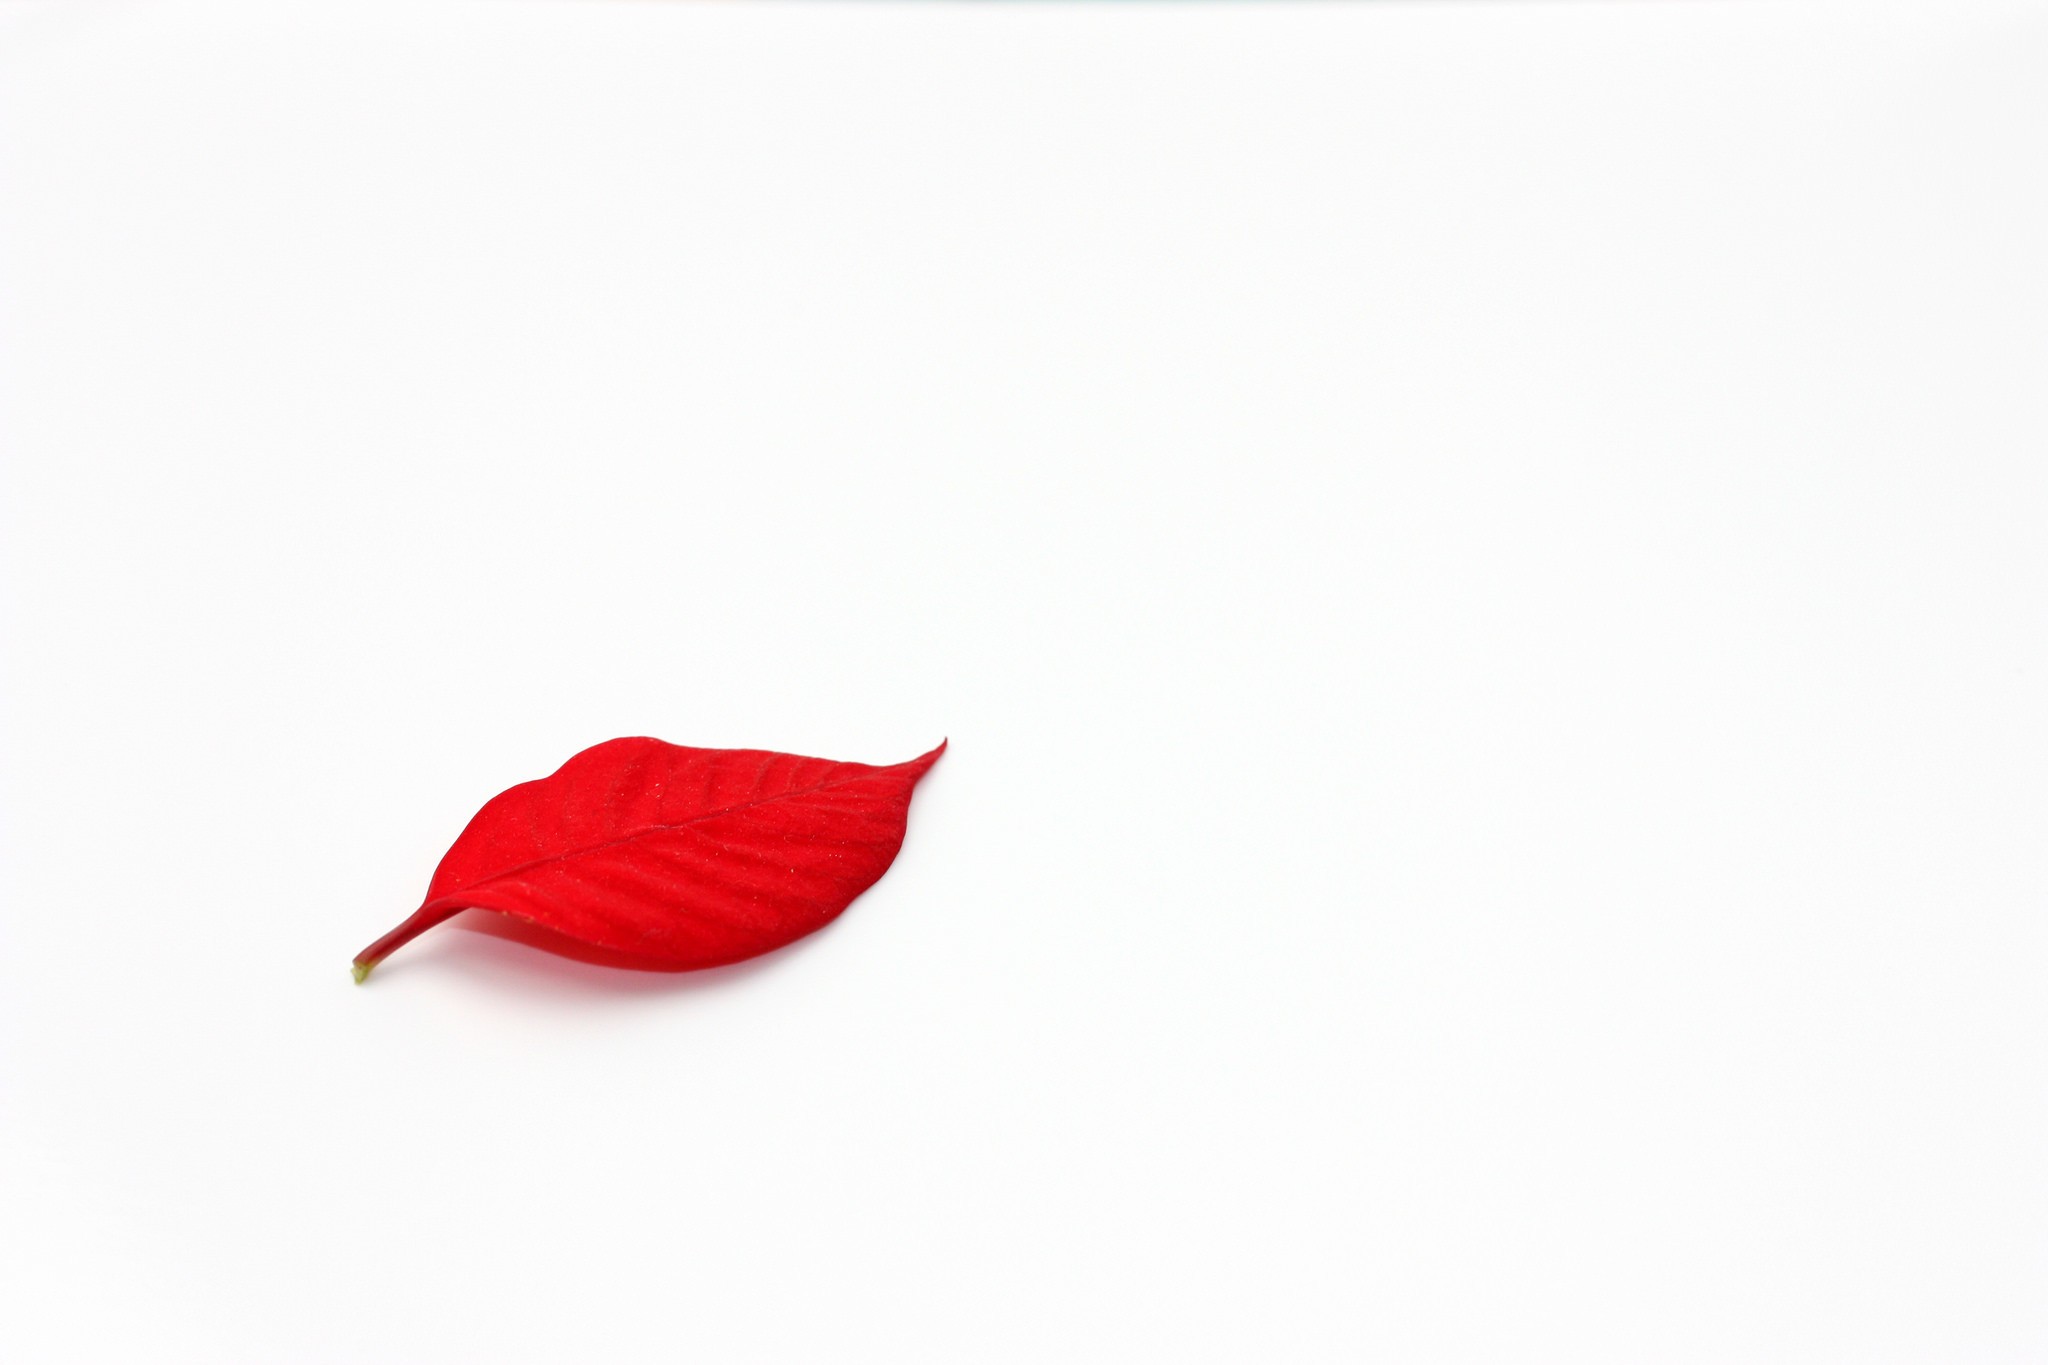 General 2048x1365 leaves red white white background minimalism simple background petals